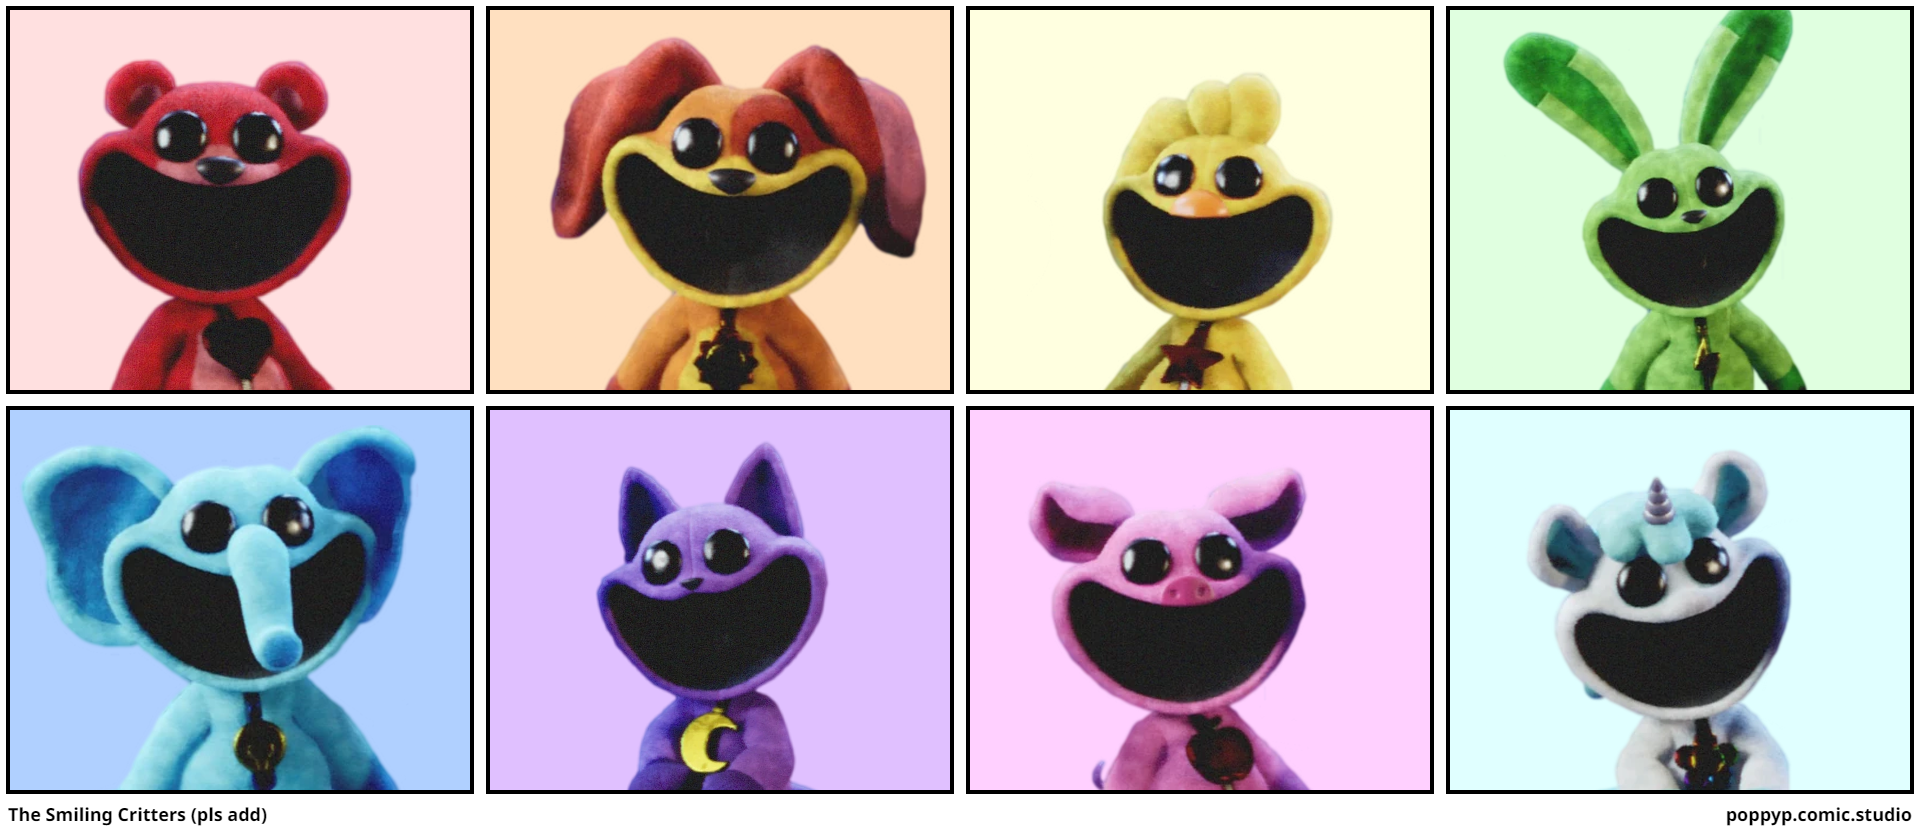 The Smiling Critters (pls add)